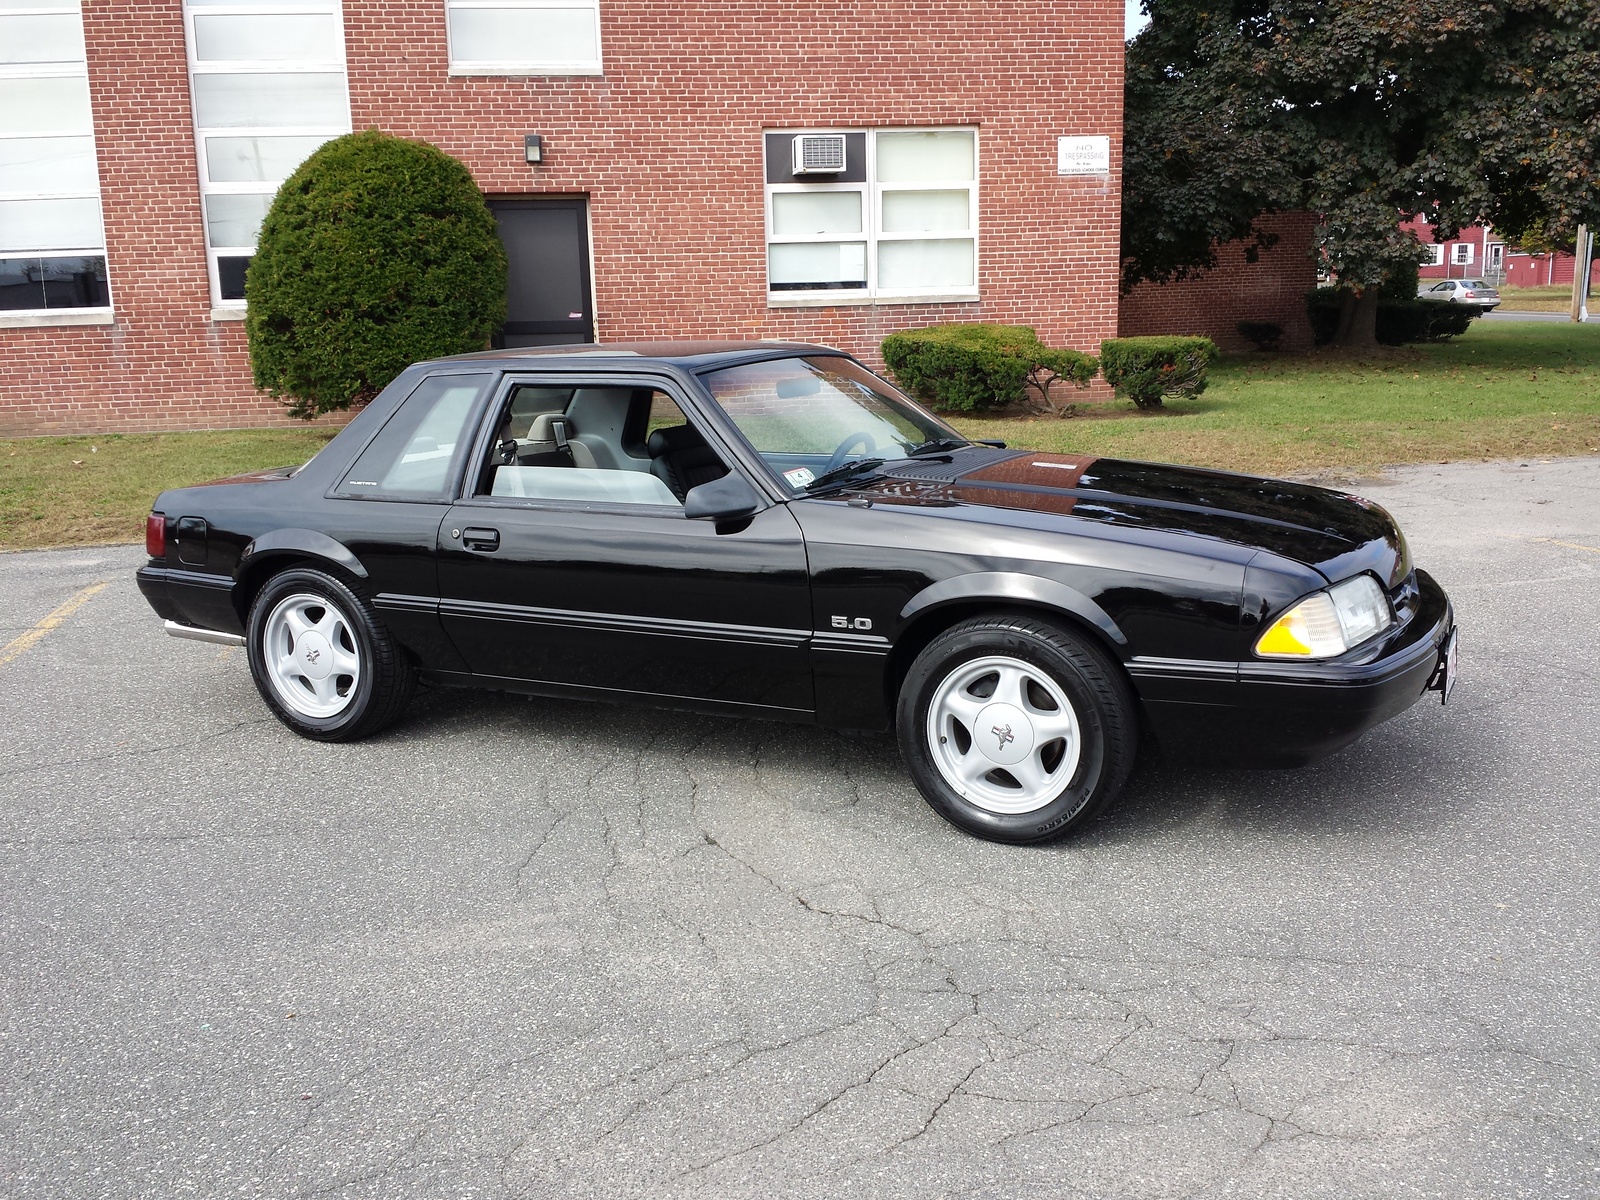 1991 Ford mustang lx hatchback specs #2